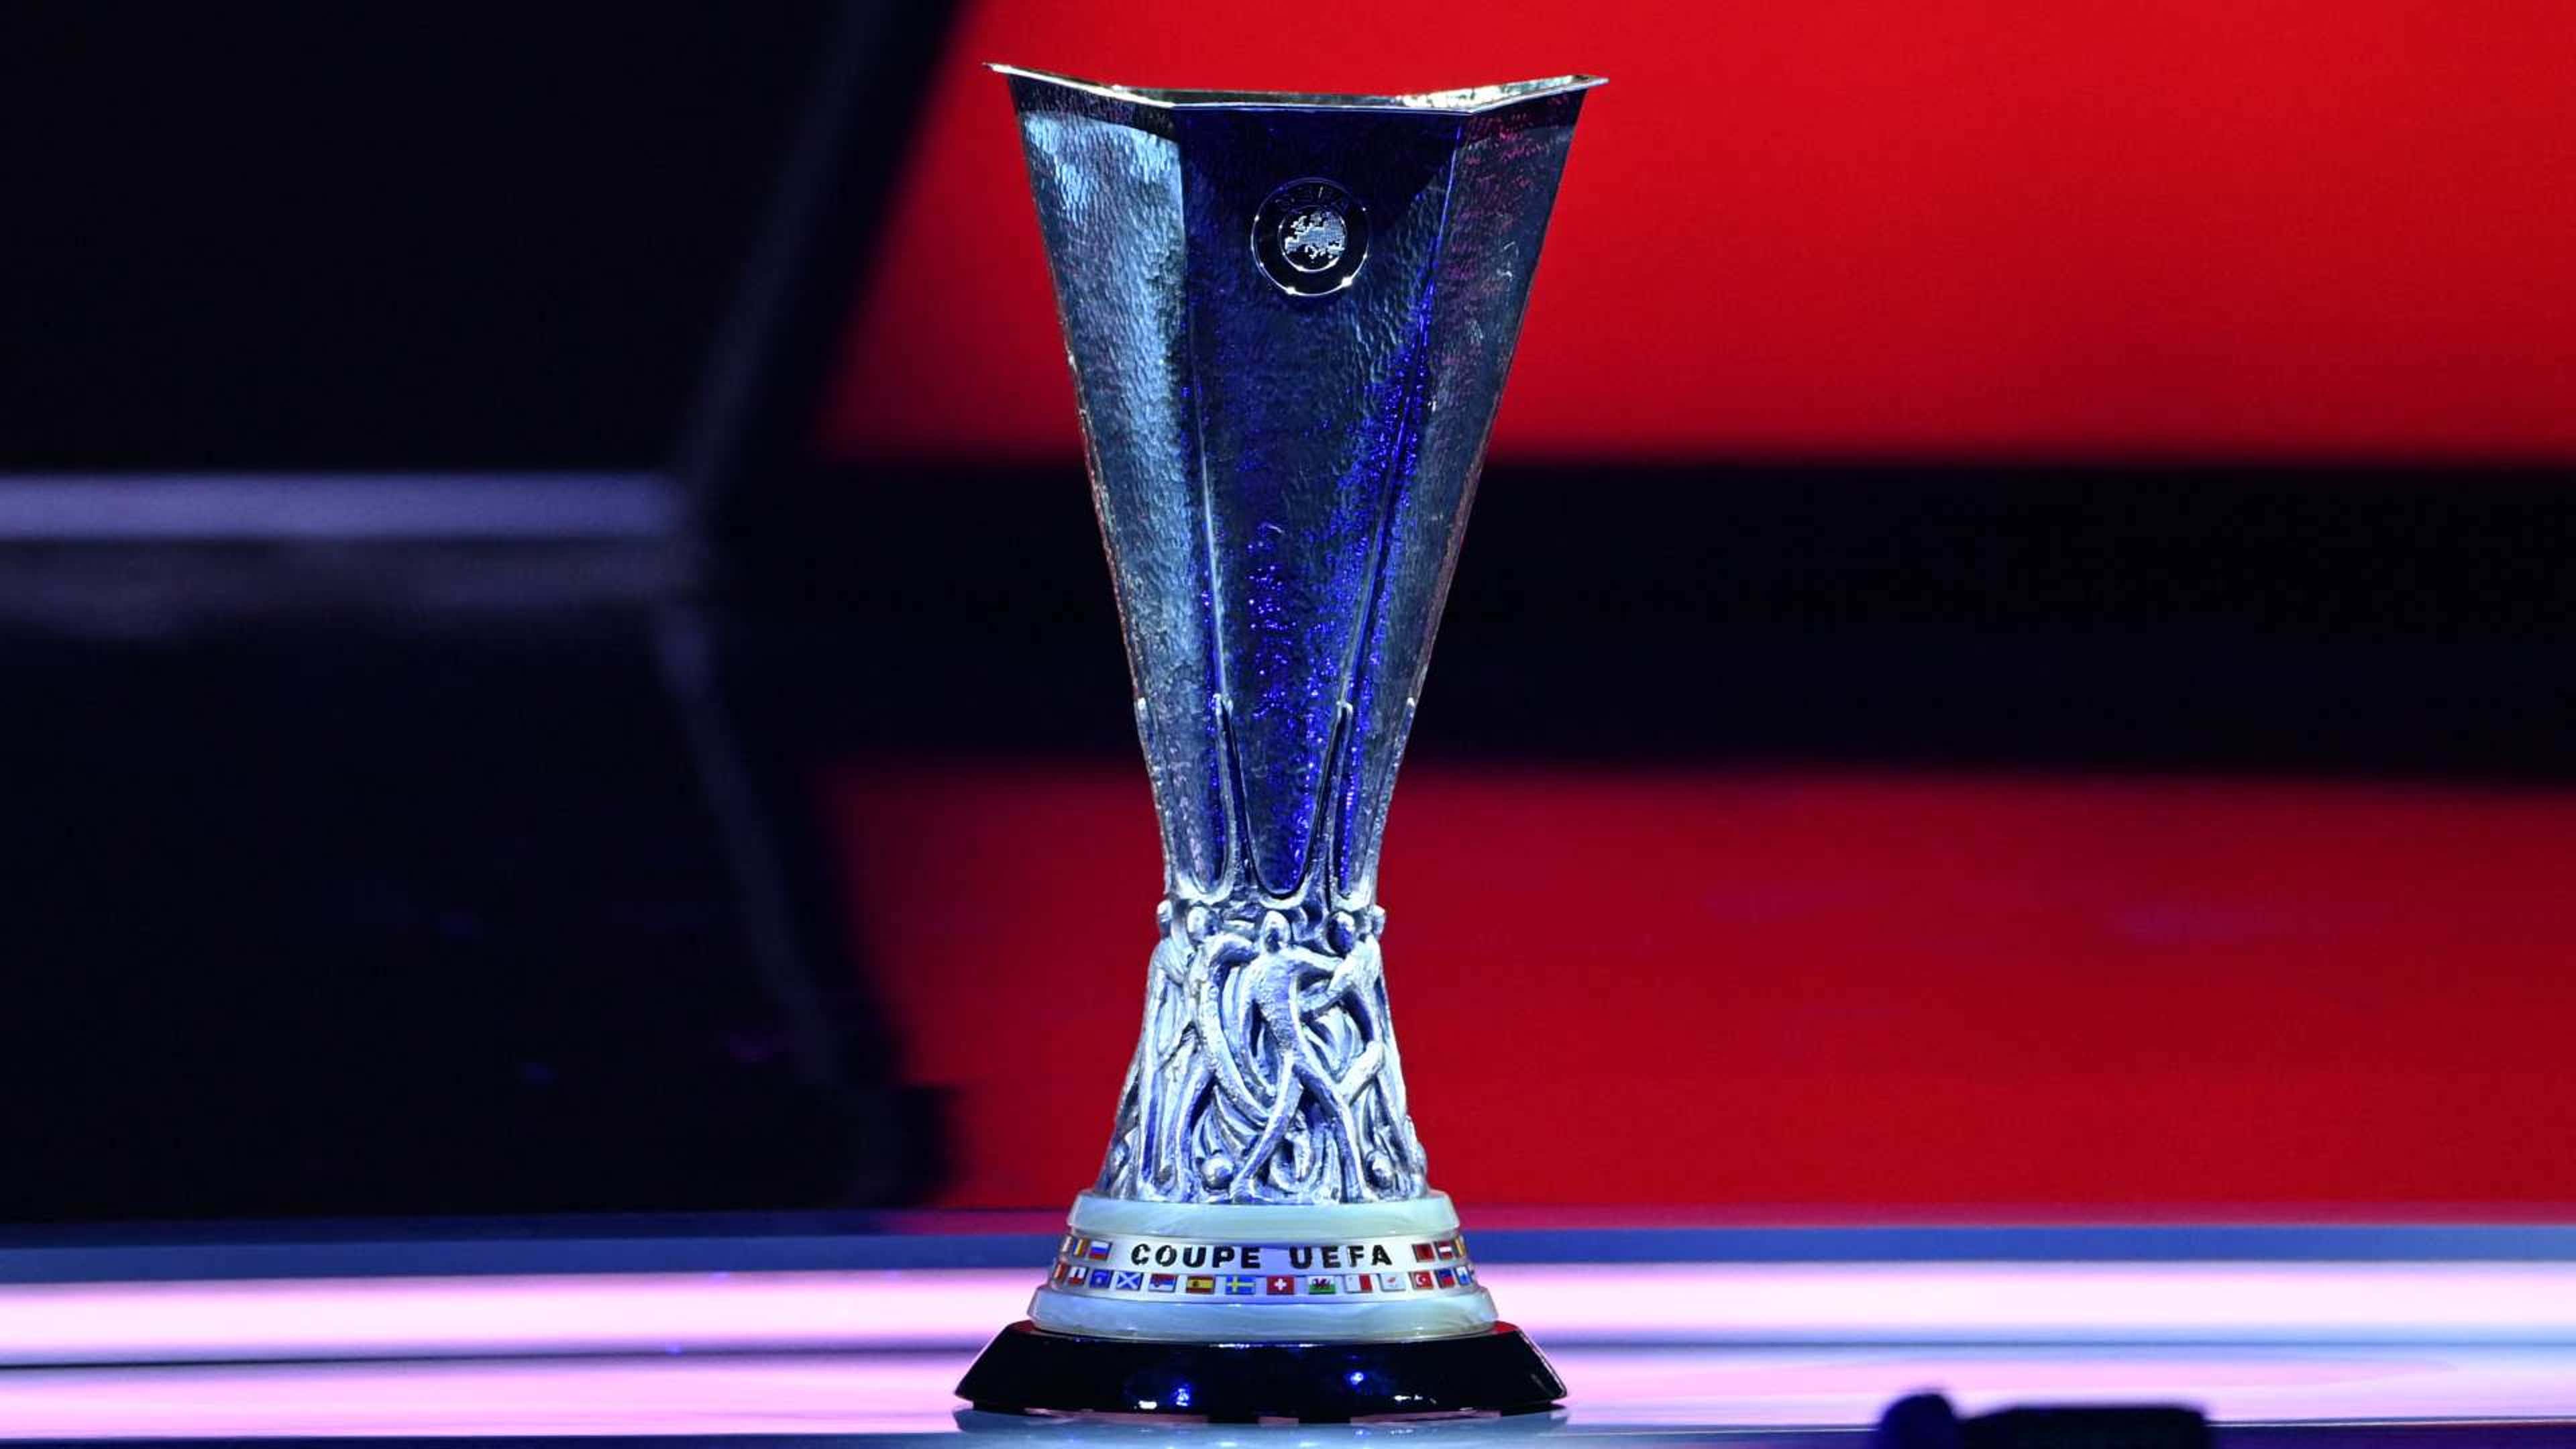 Get your Champions League semi-final tickets, News